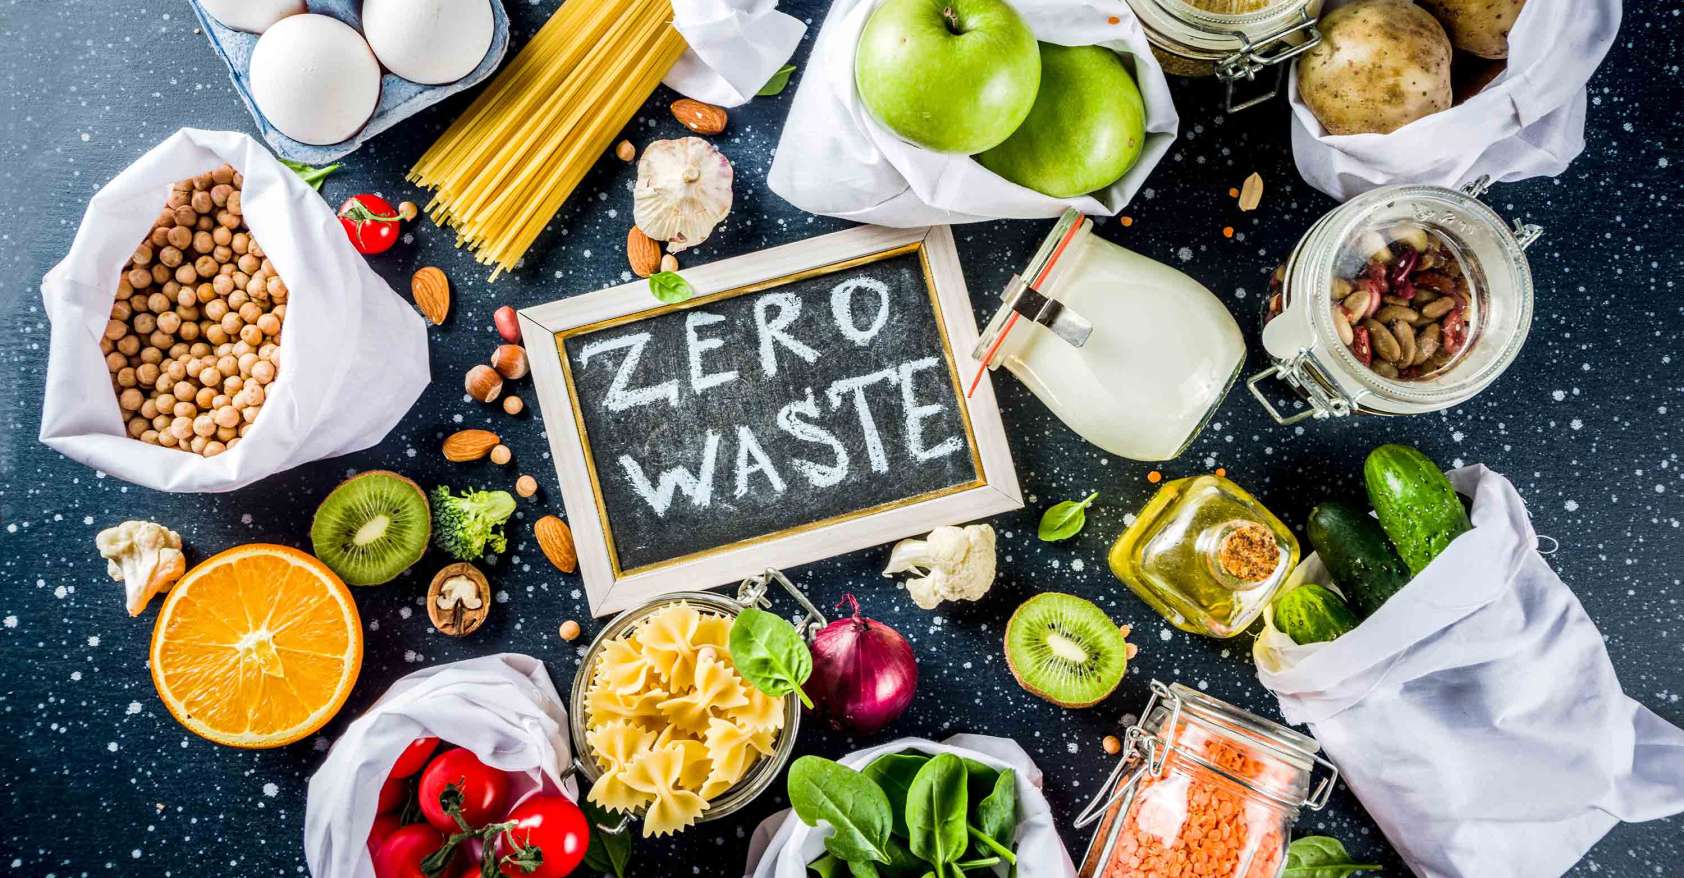 camera looking down on bags of food on a table with the words zero waste on a chalkboard in the center